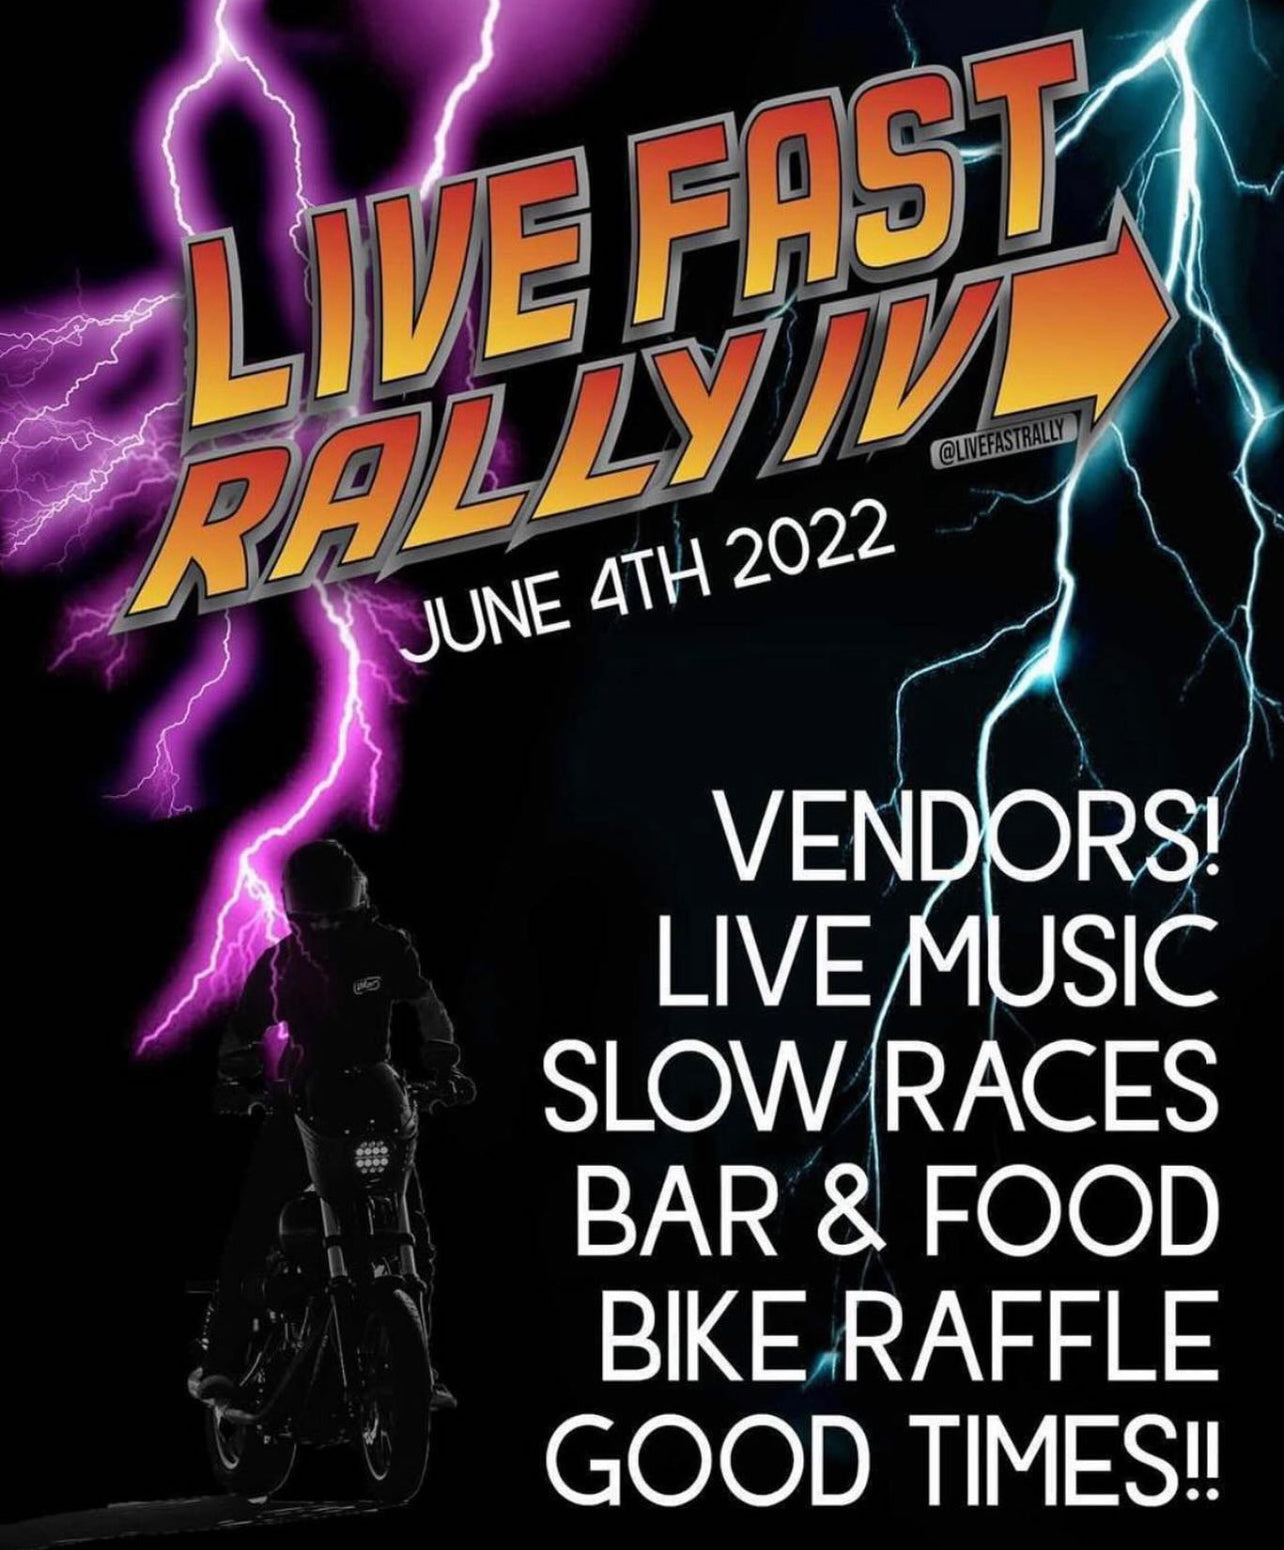 LIVE FAST RALLY 2022